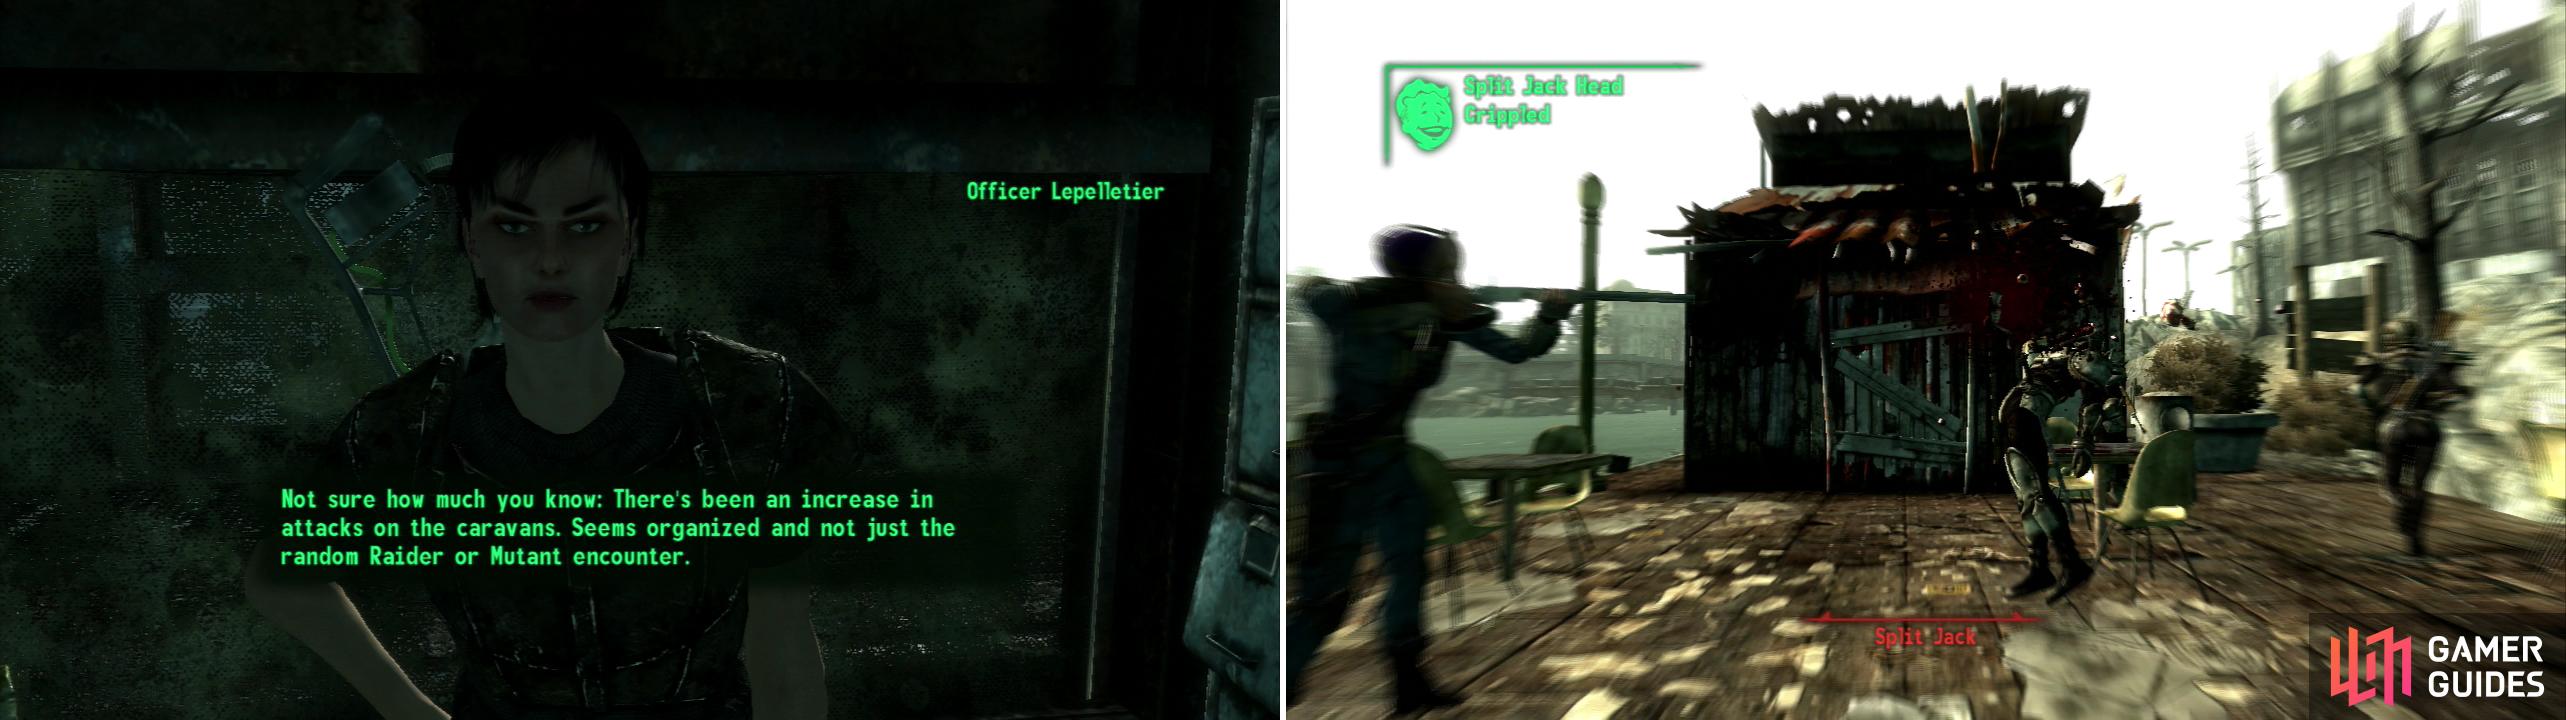 Whether its due to her incompetence or not, Officer Lepelletier is having trouble getting water to its destination (left). Kill some Bandits attacking a caravan, then find their leader and kill him, too (right).